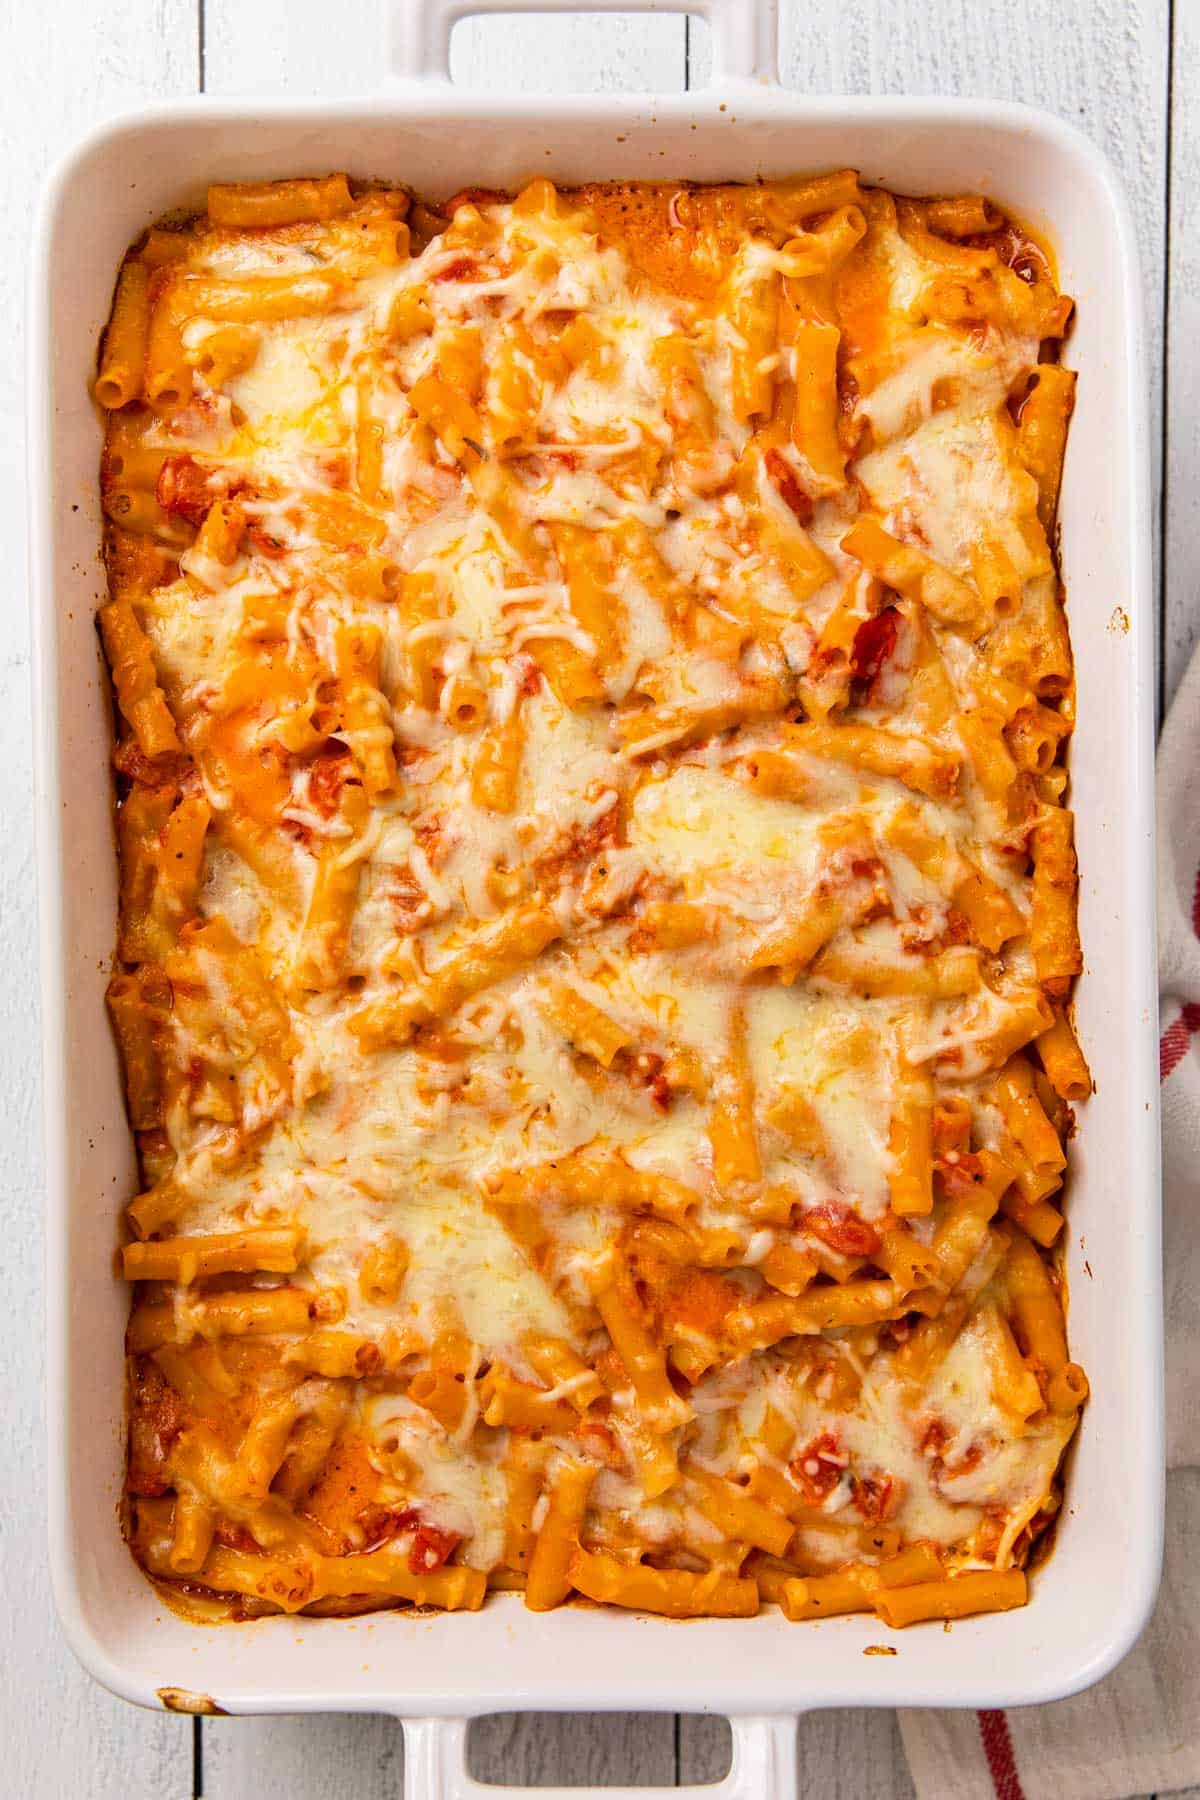 a dish with a baked pasta dish covered in melted cheese